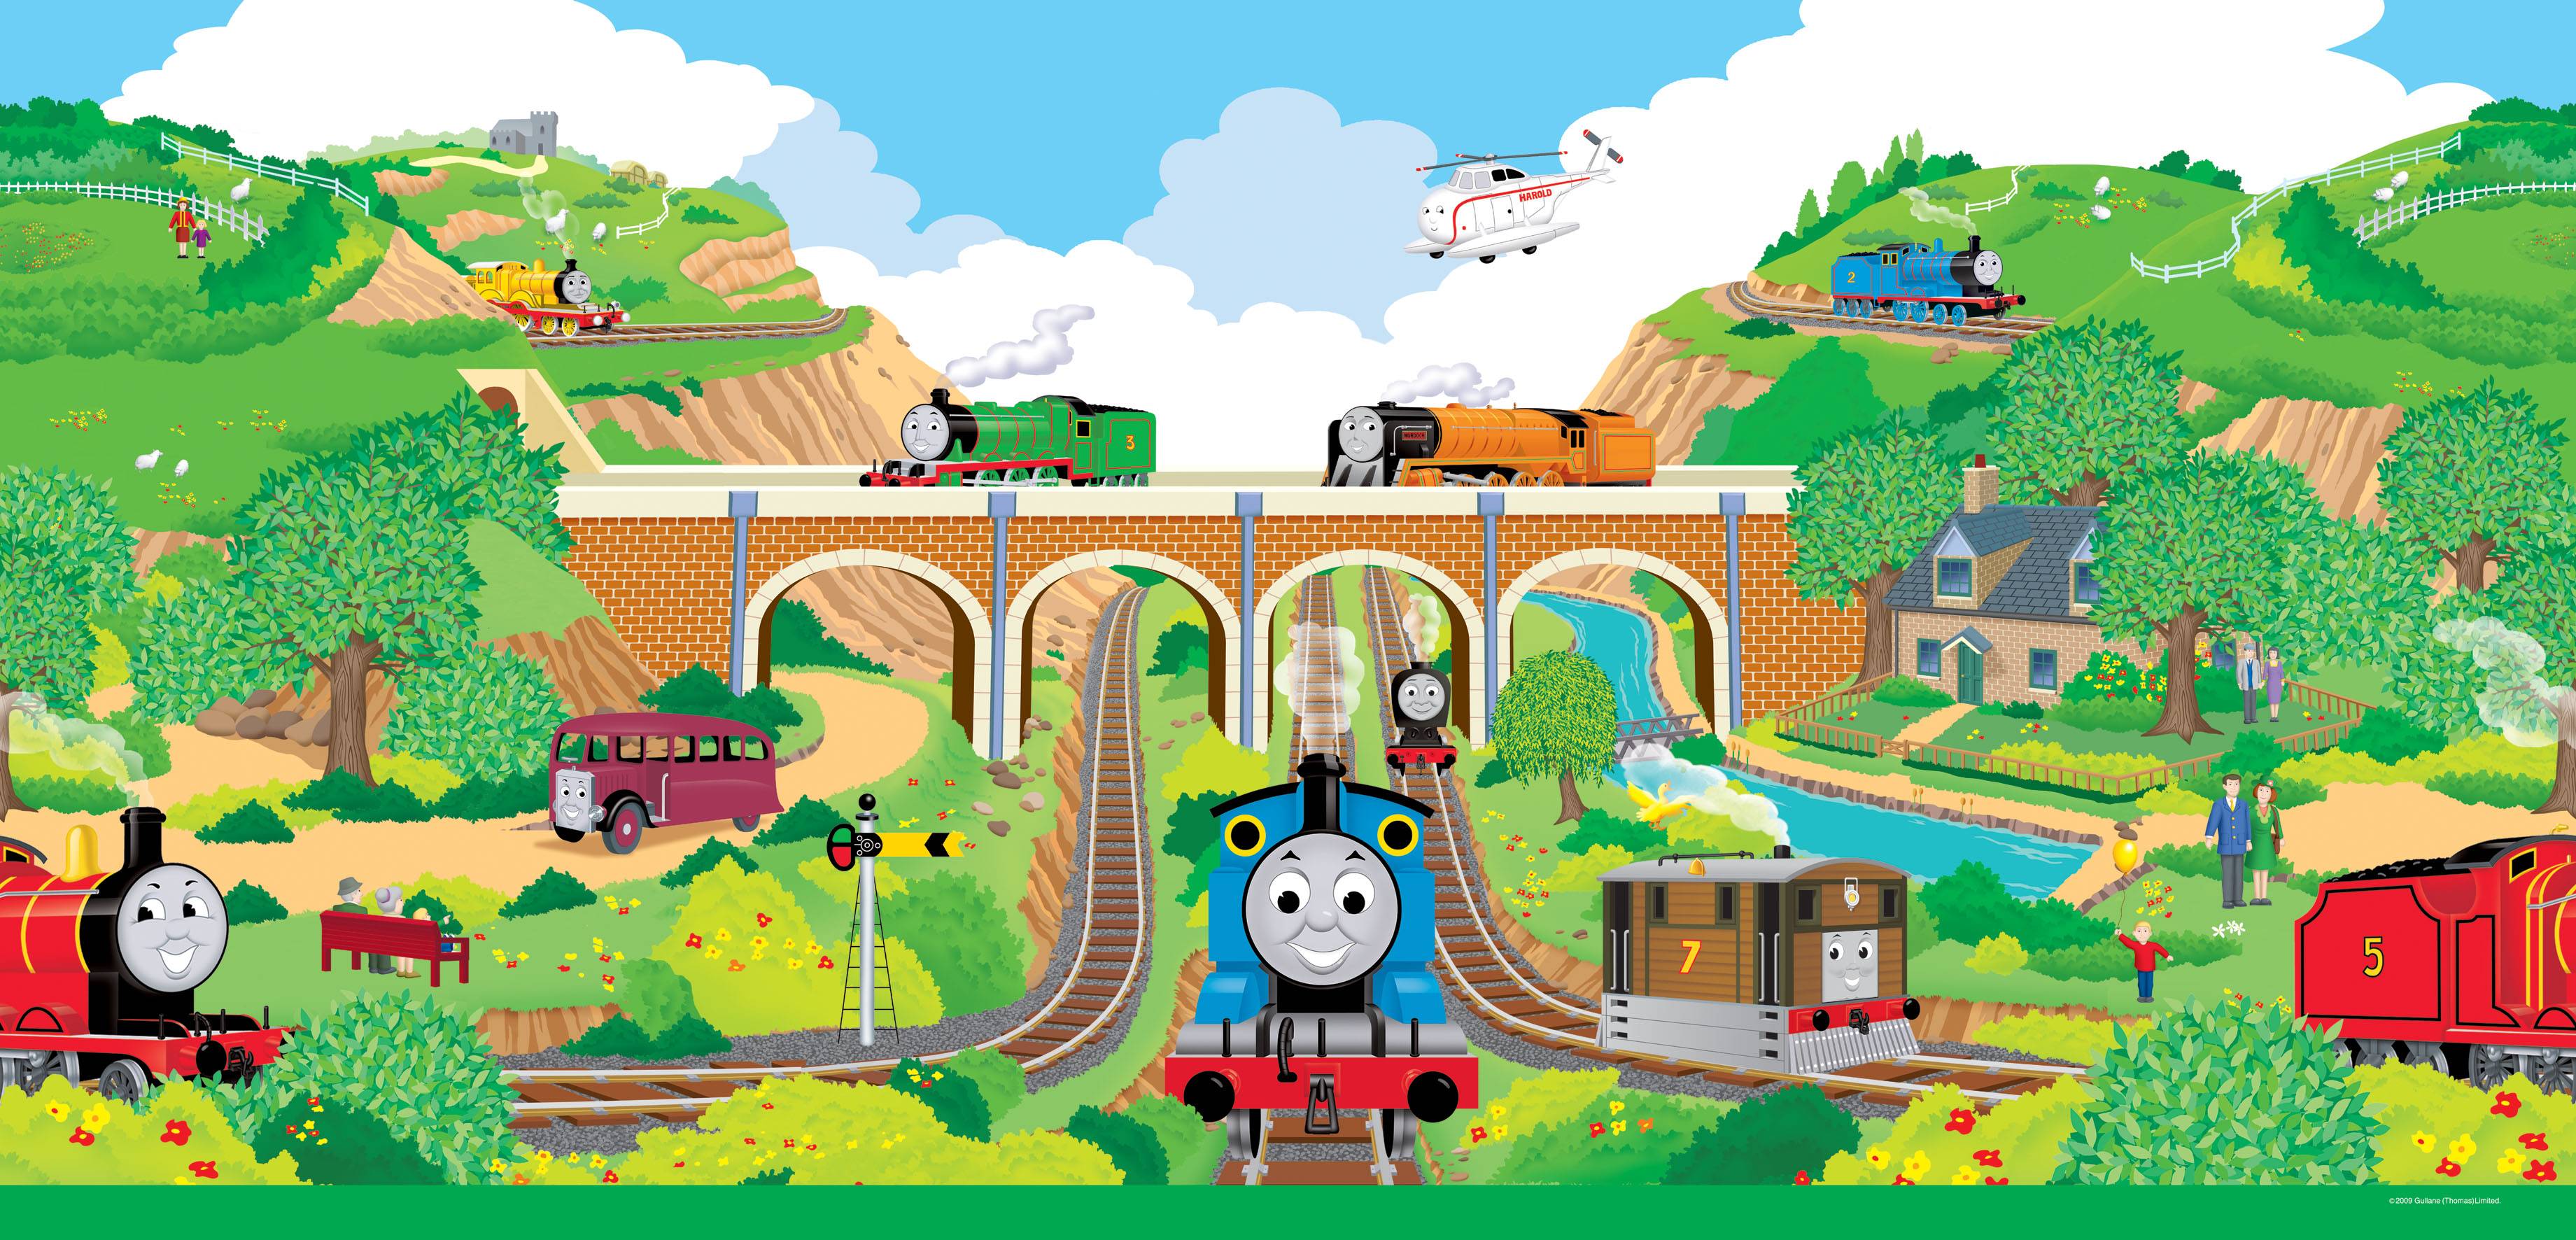 541770 free desktop backgrounds for thomas the tank engine and friends   Rare Gallery HD Wallpapers